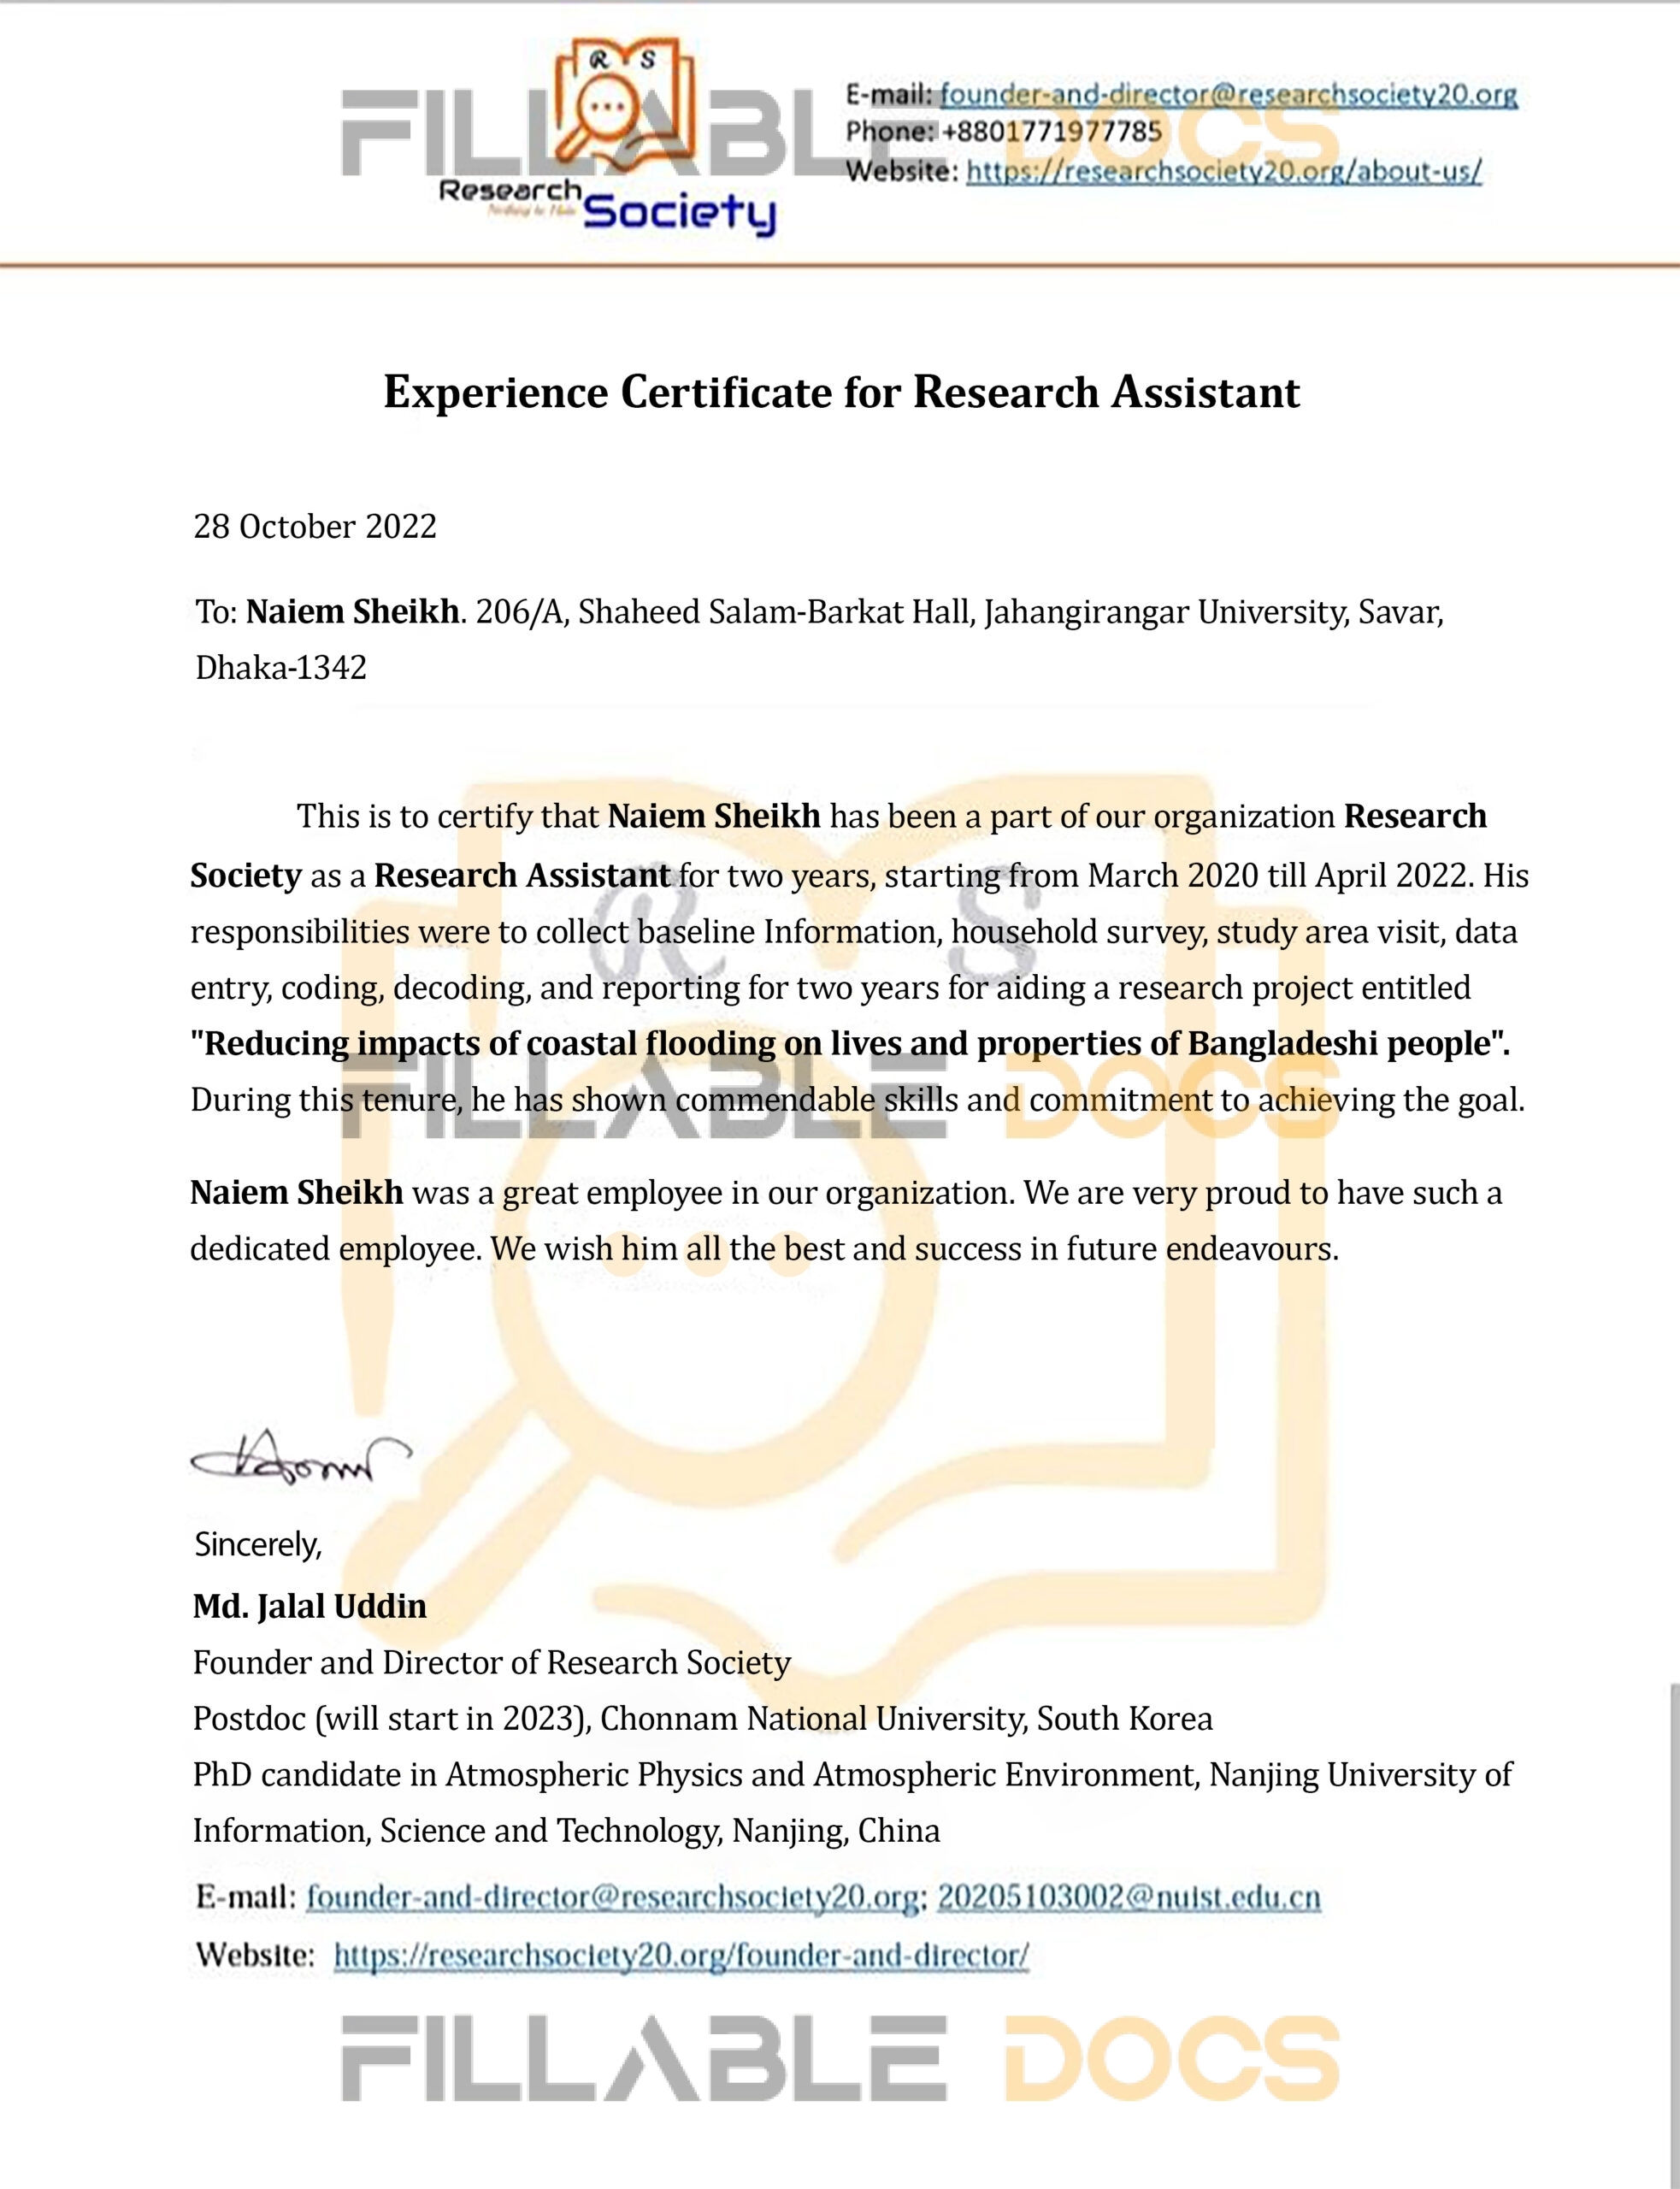 Purchase Realistic Fake Research Society Experience Certificate Templates | Easily Editable